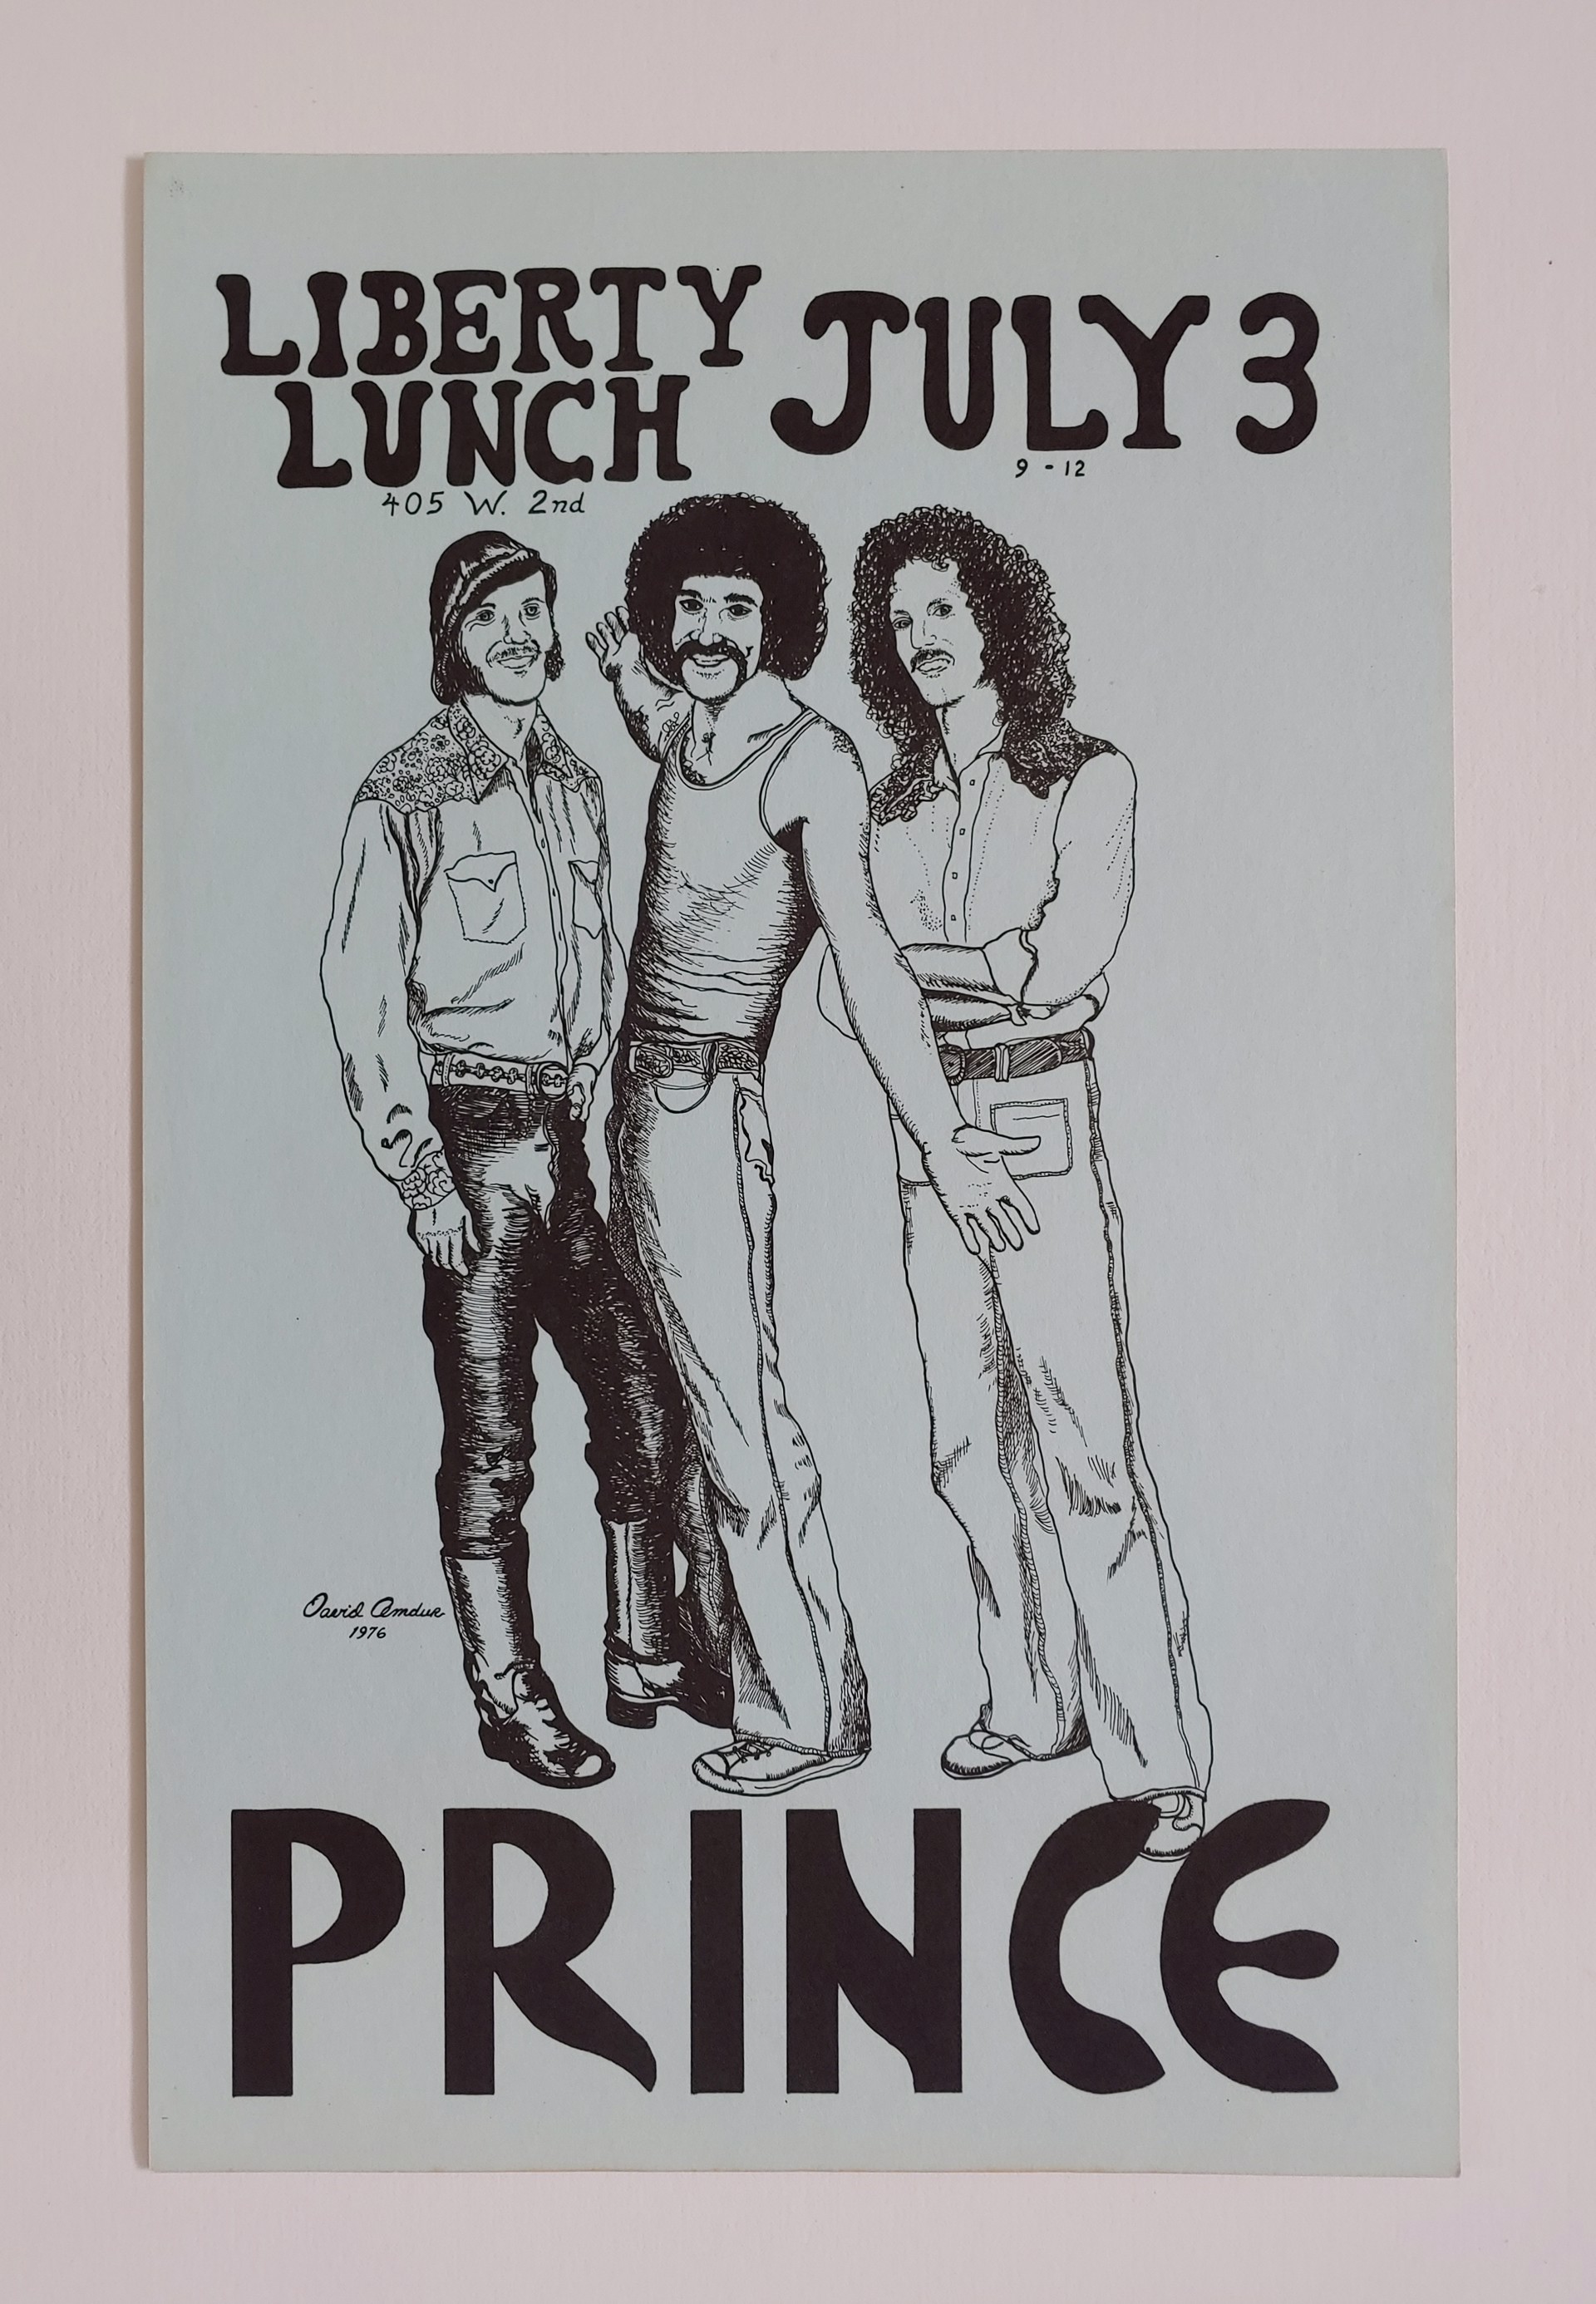 Liberty Lunch, Prince - Poster by David Amdur